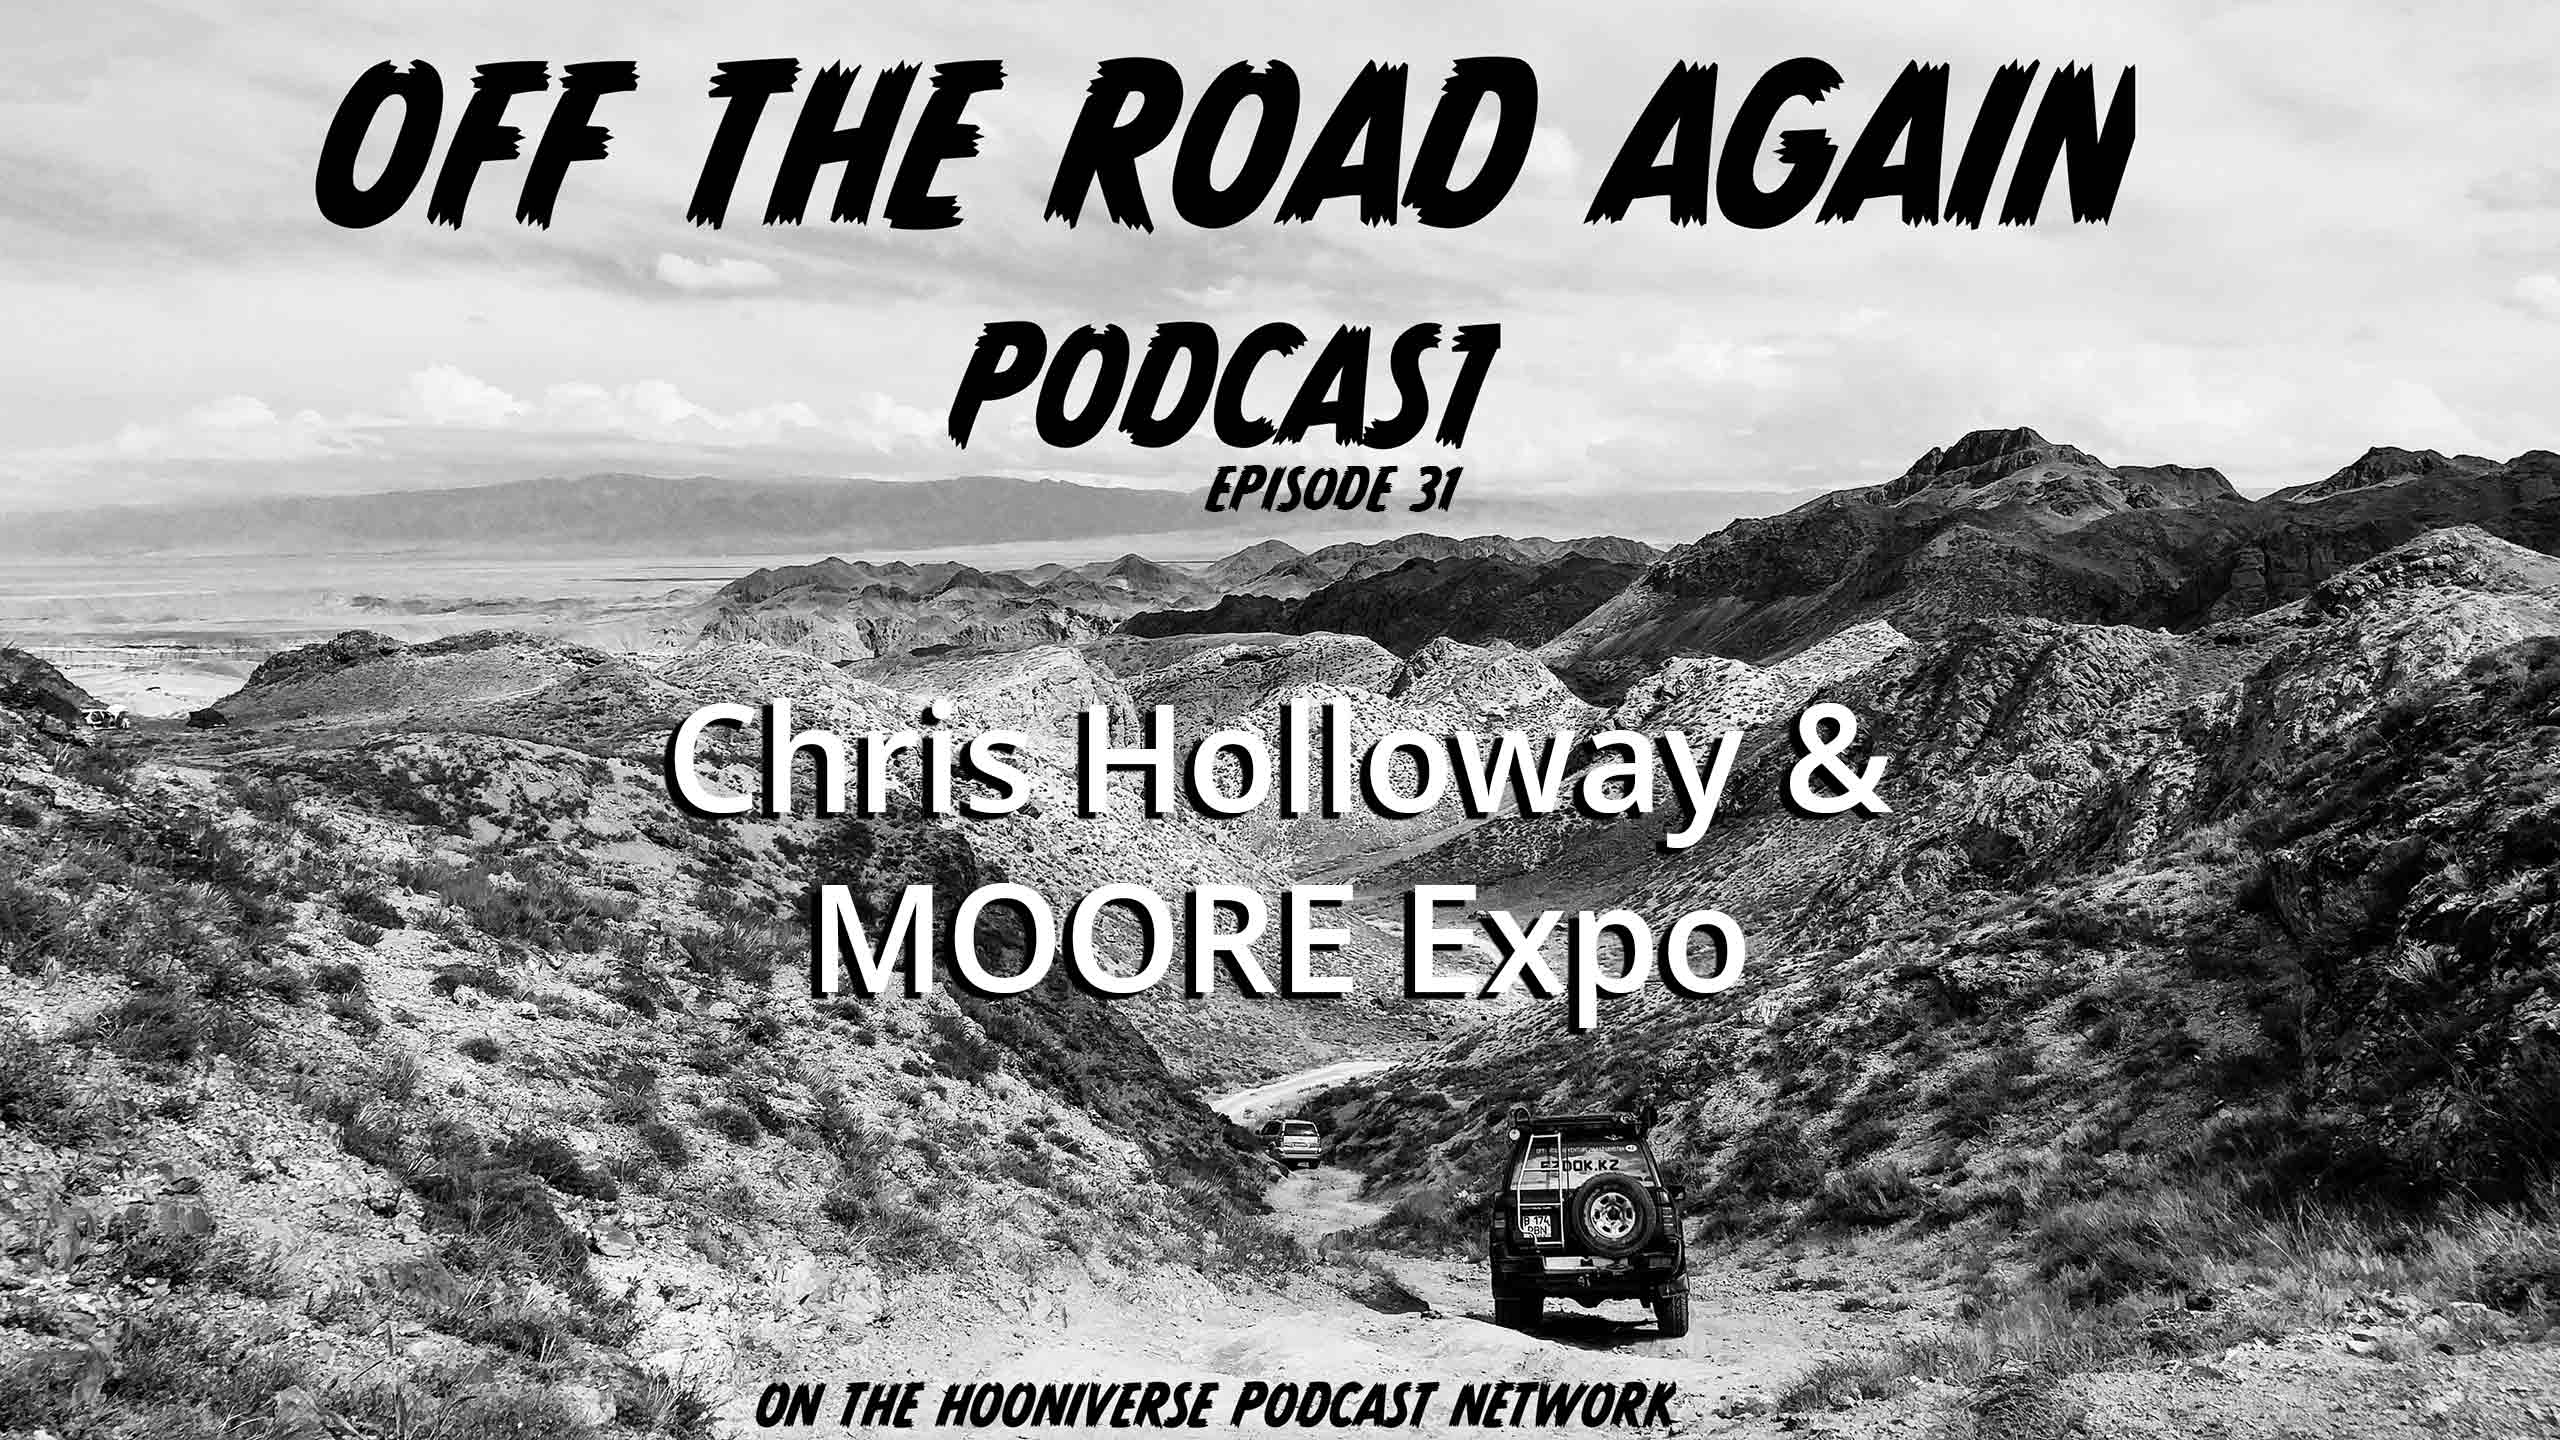 MOORE-Expo-Off-The-Road-Again-Podcast-Episode-31